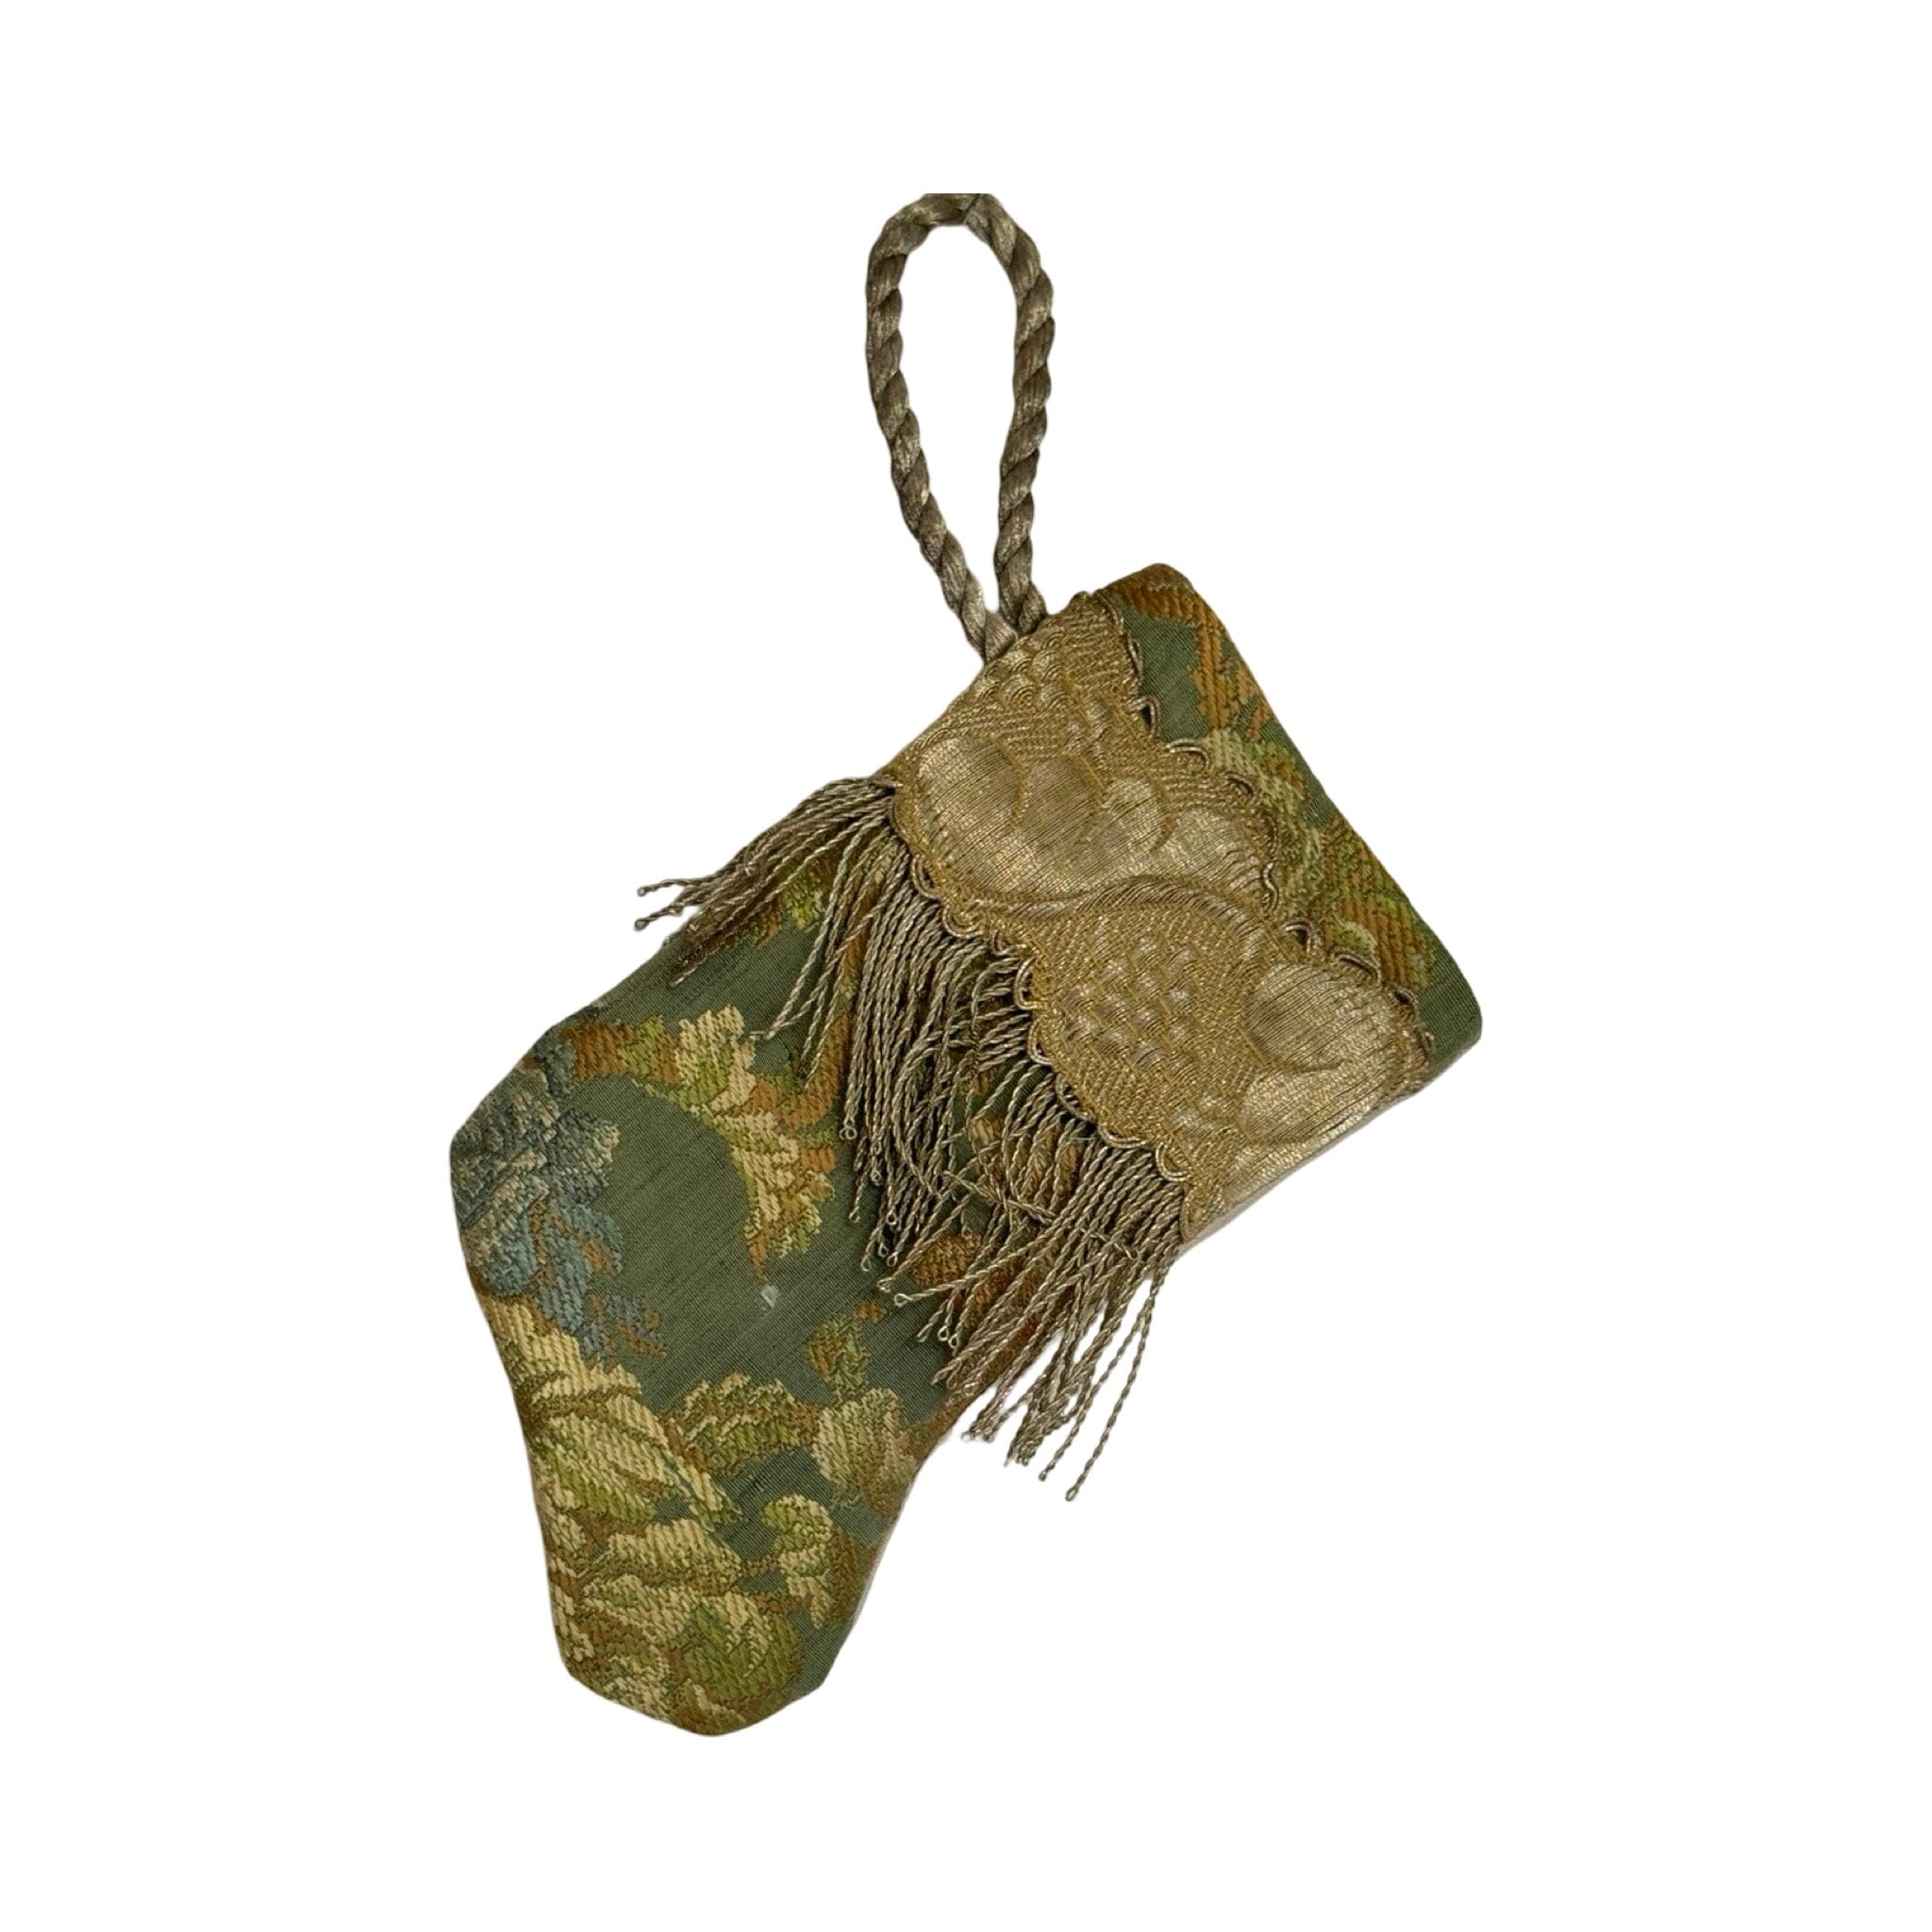 Handmade Mini Stocking Made From Vintage Fabric and Trims- Green Floral Ornament B. Viz Design H 